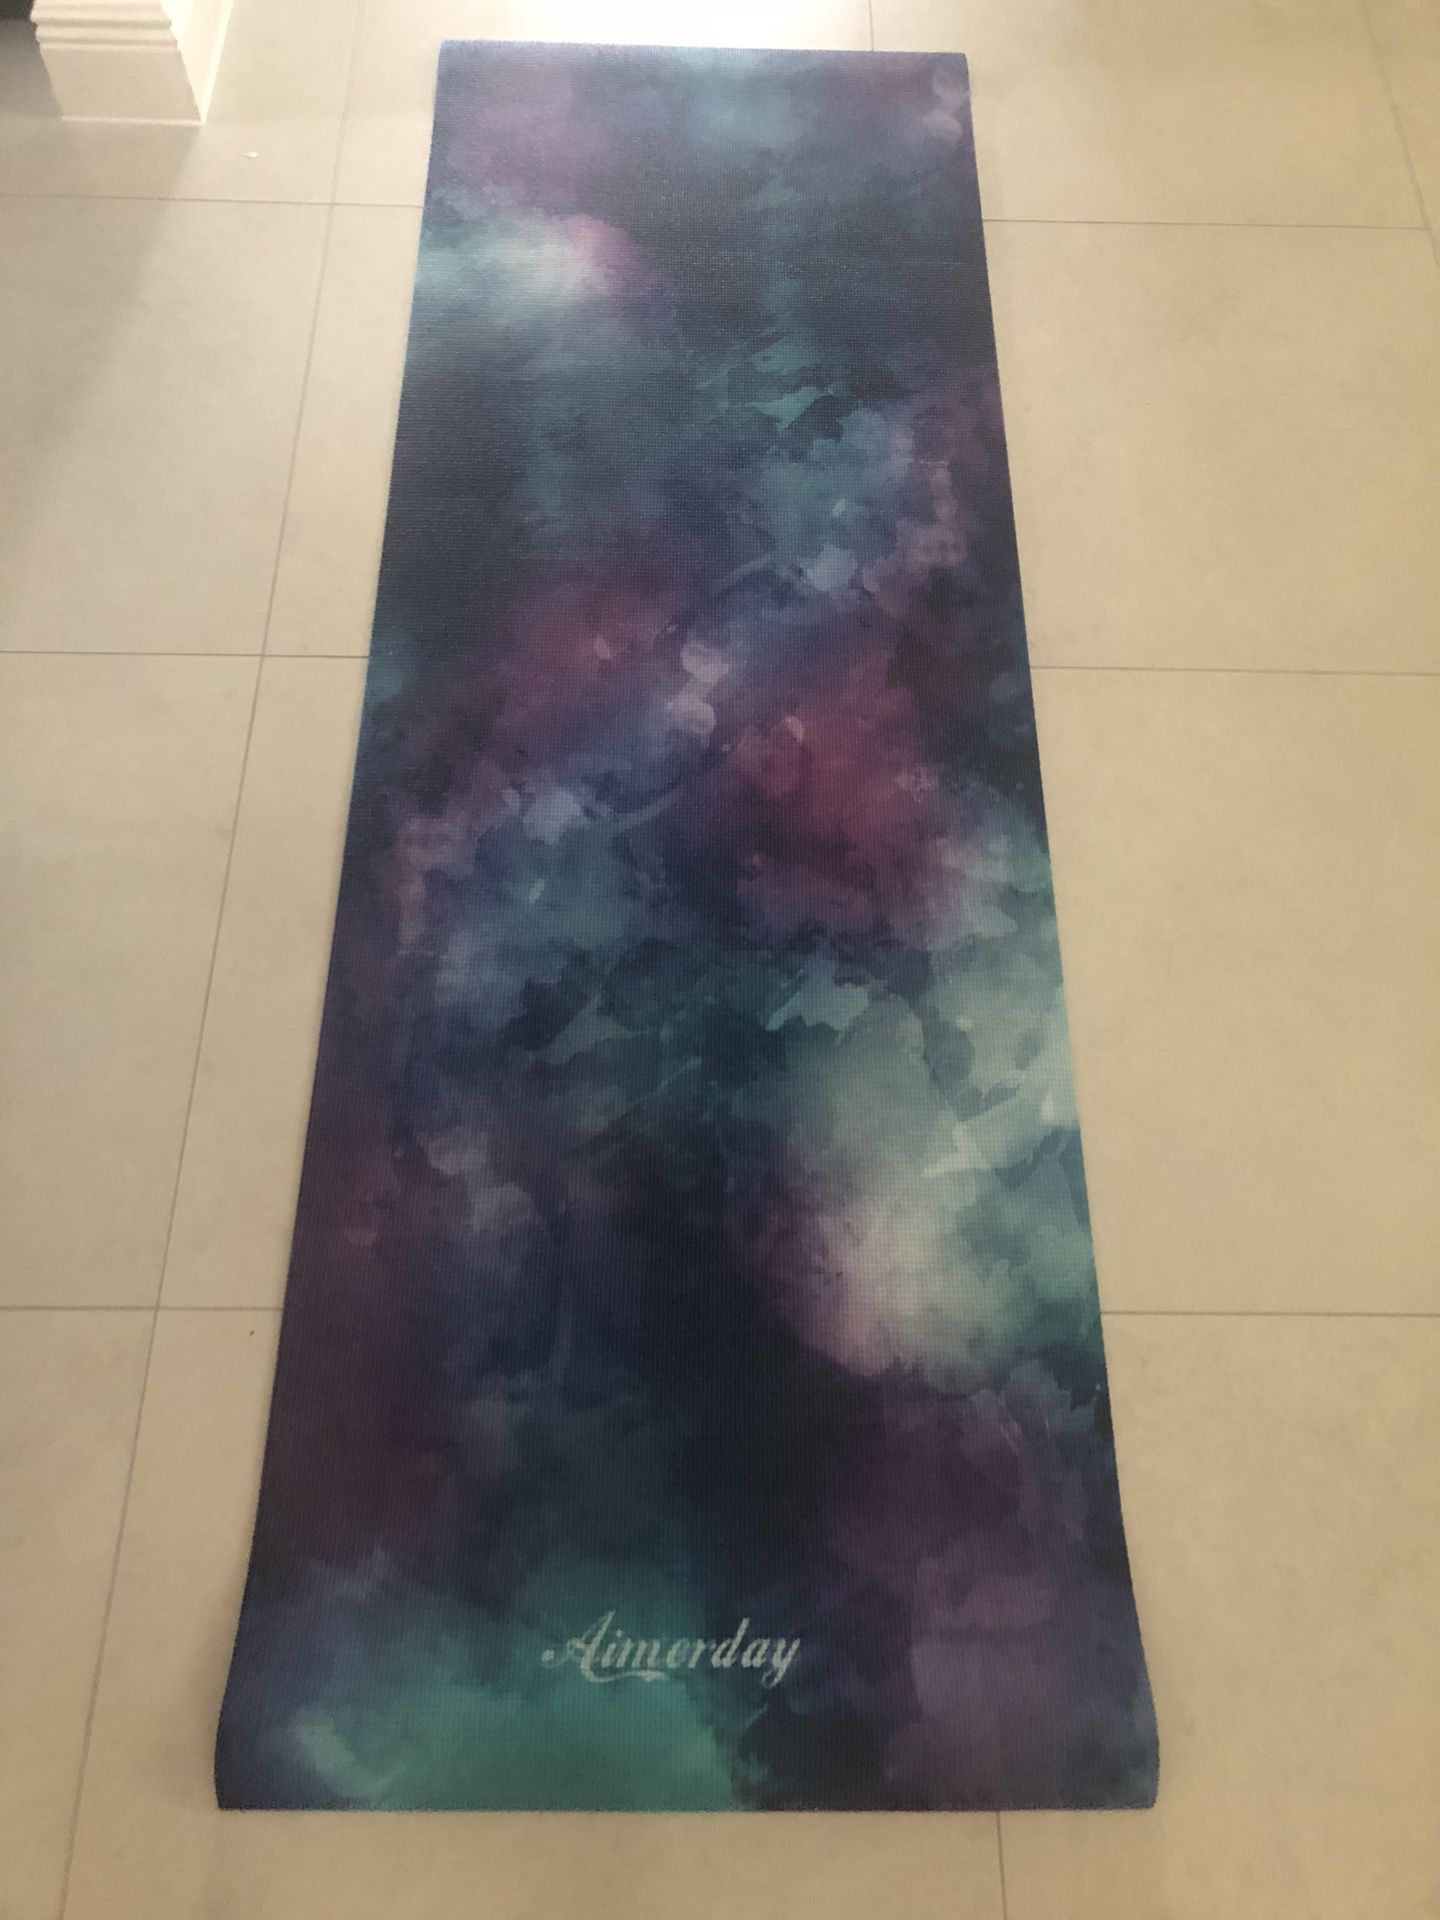 Brand new, never used yoga mat! Cool design!